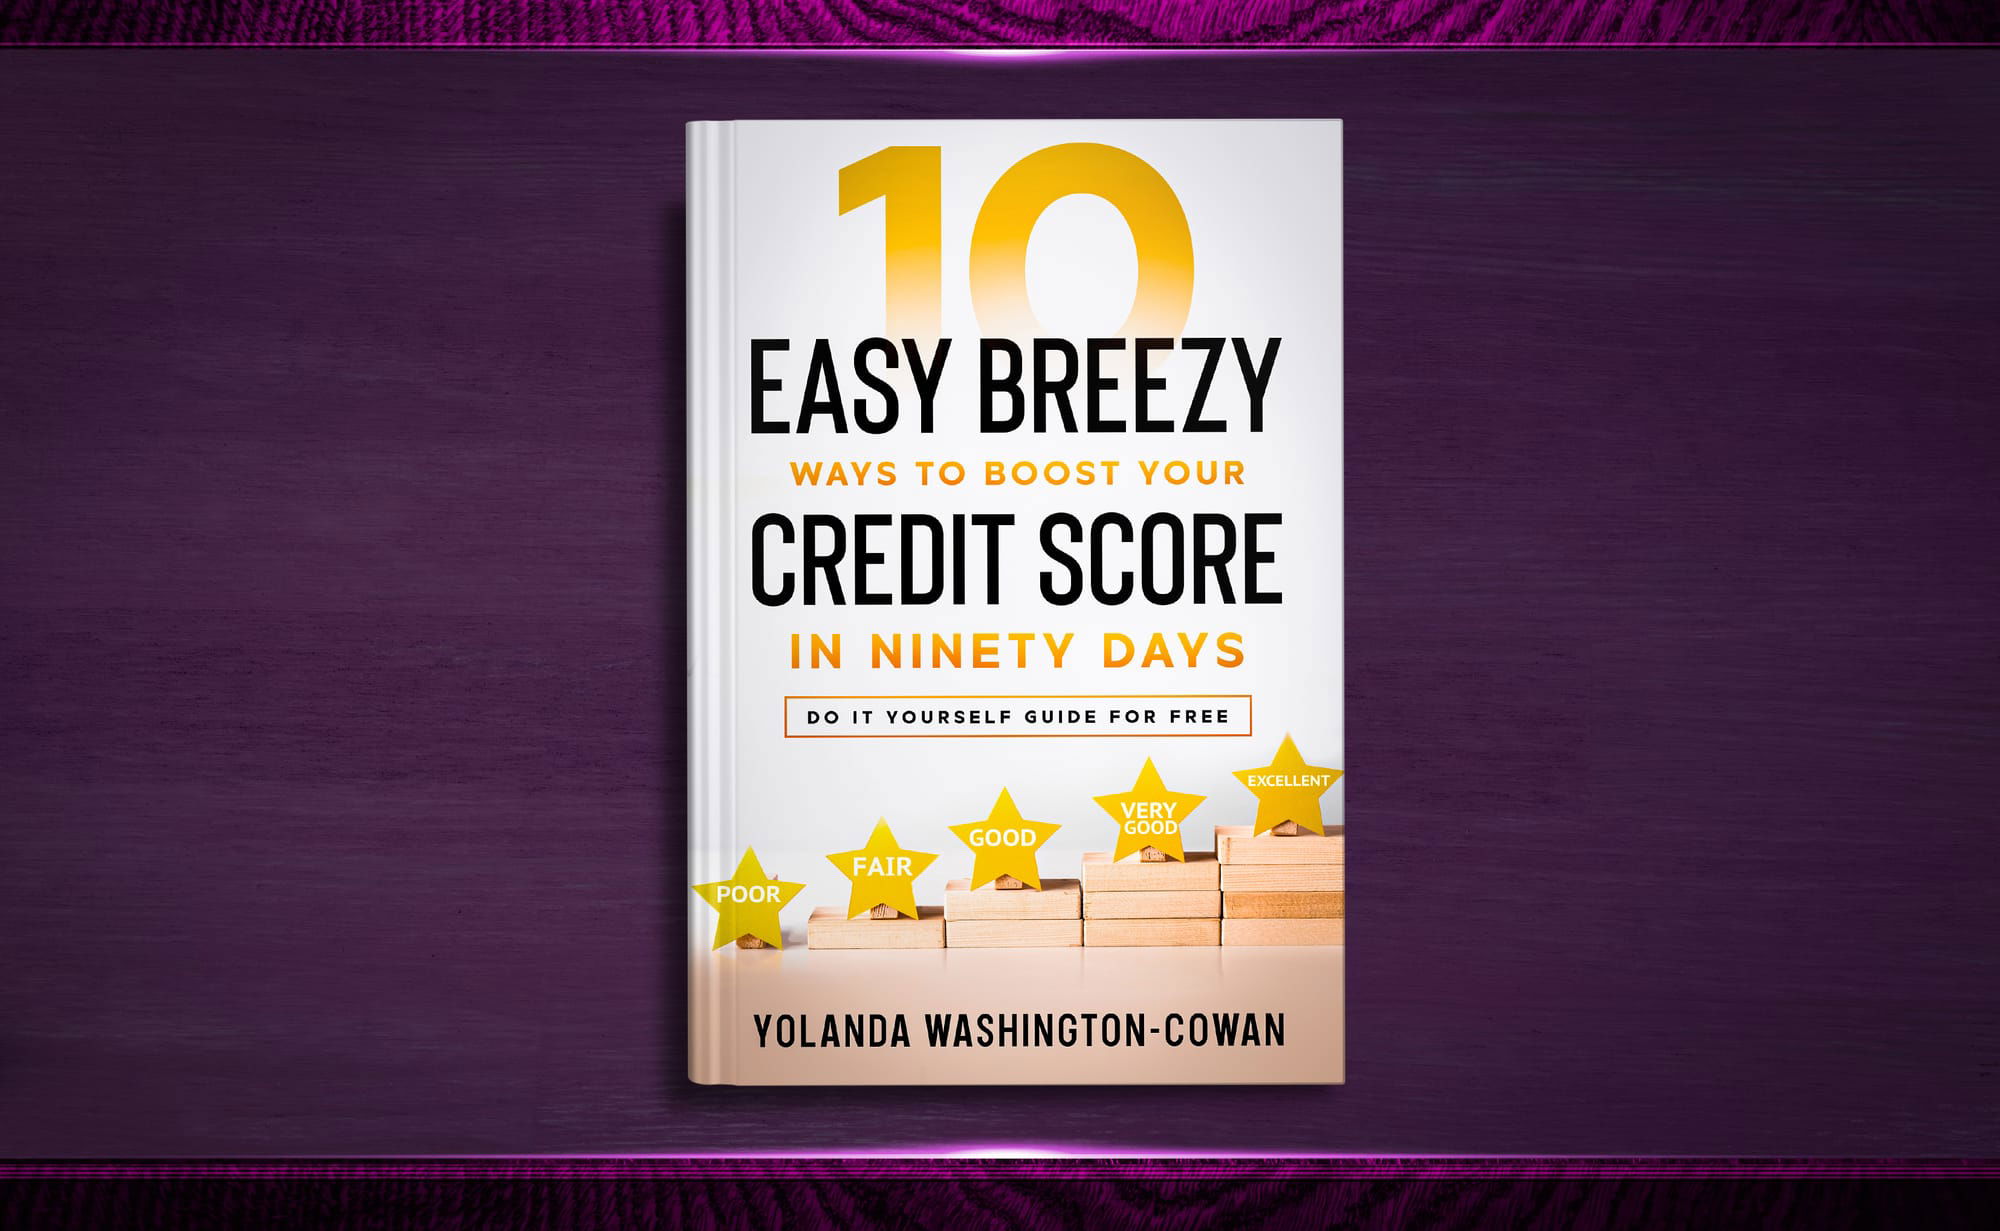 10 Easy Breezy Ways to Boost Your Credit Score in 90 Days Coming Soon!!!